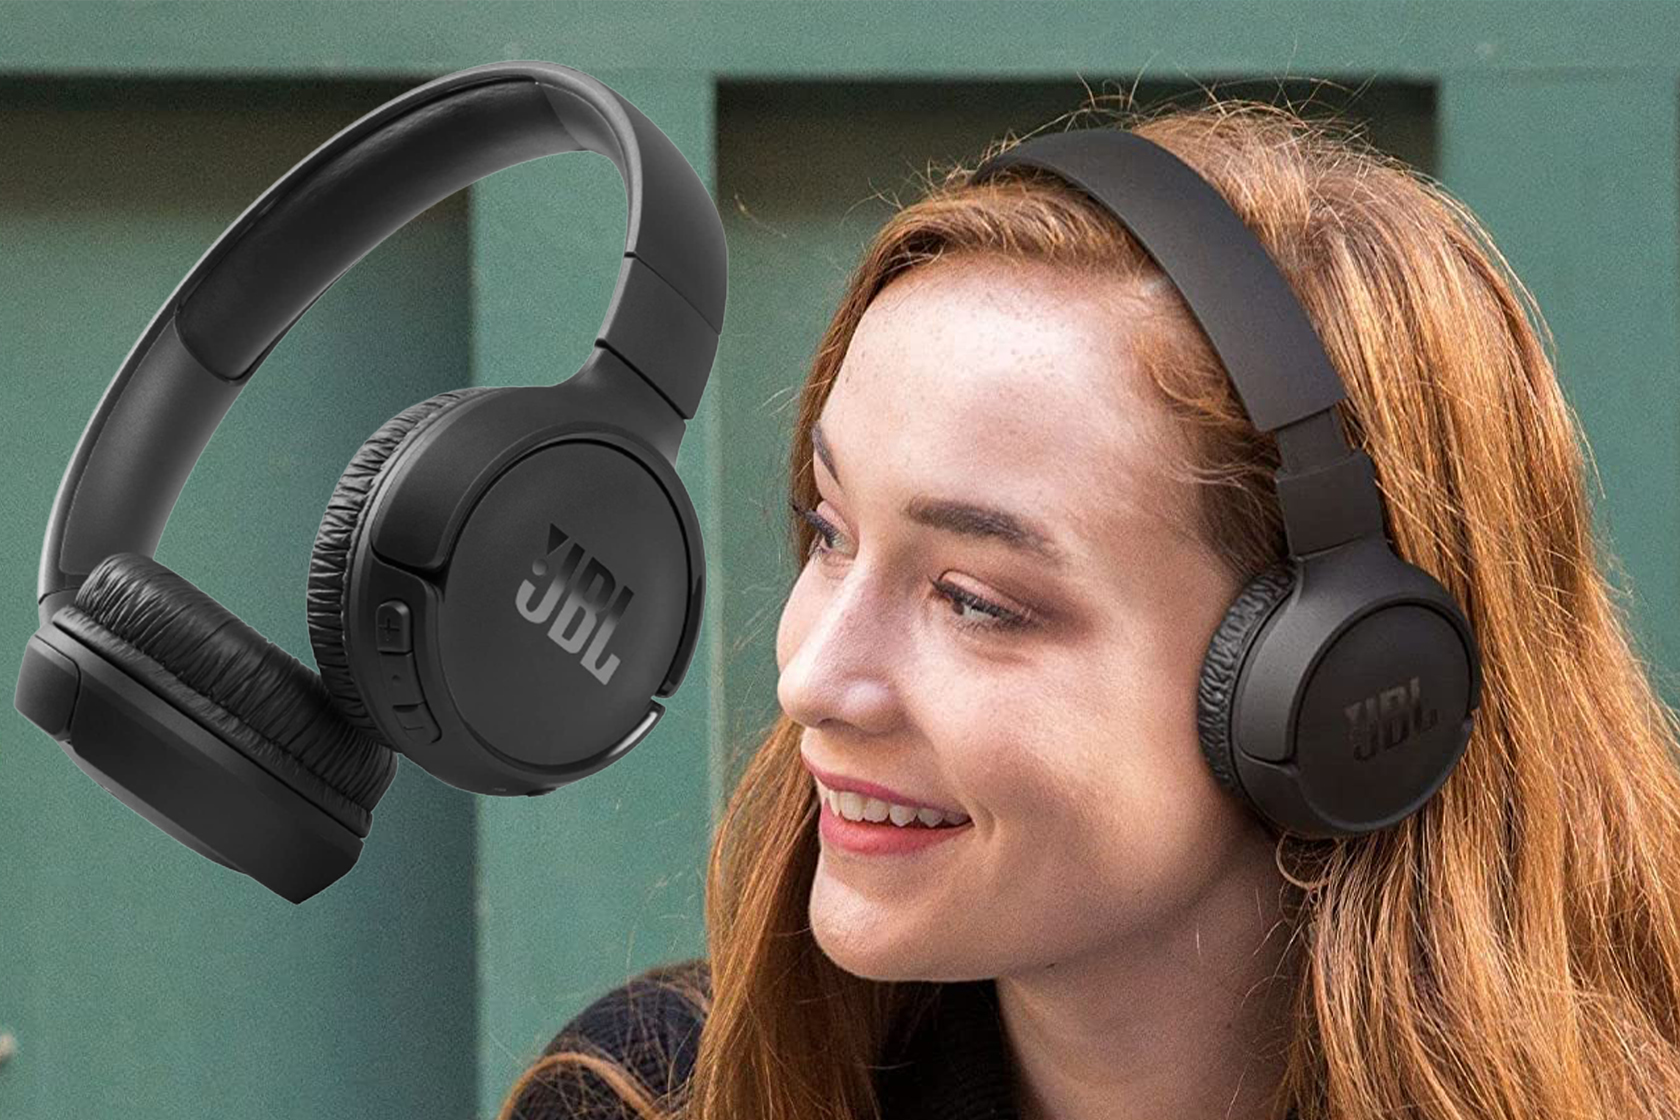 These JBL headphones are 40% off at Amazon today